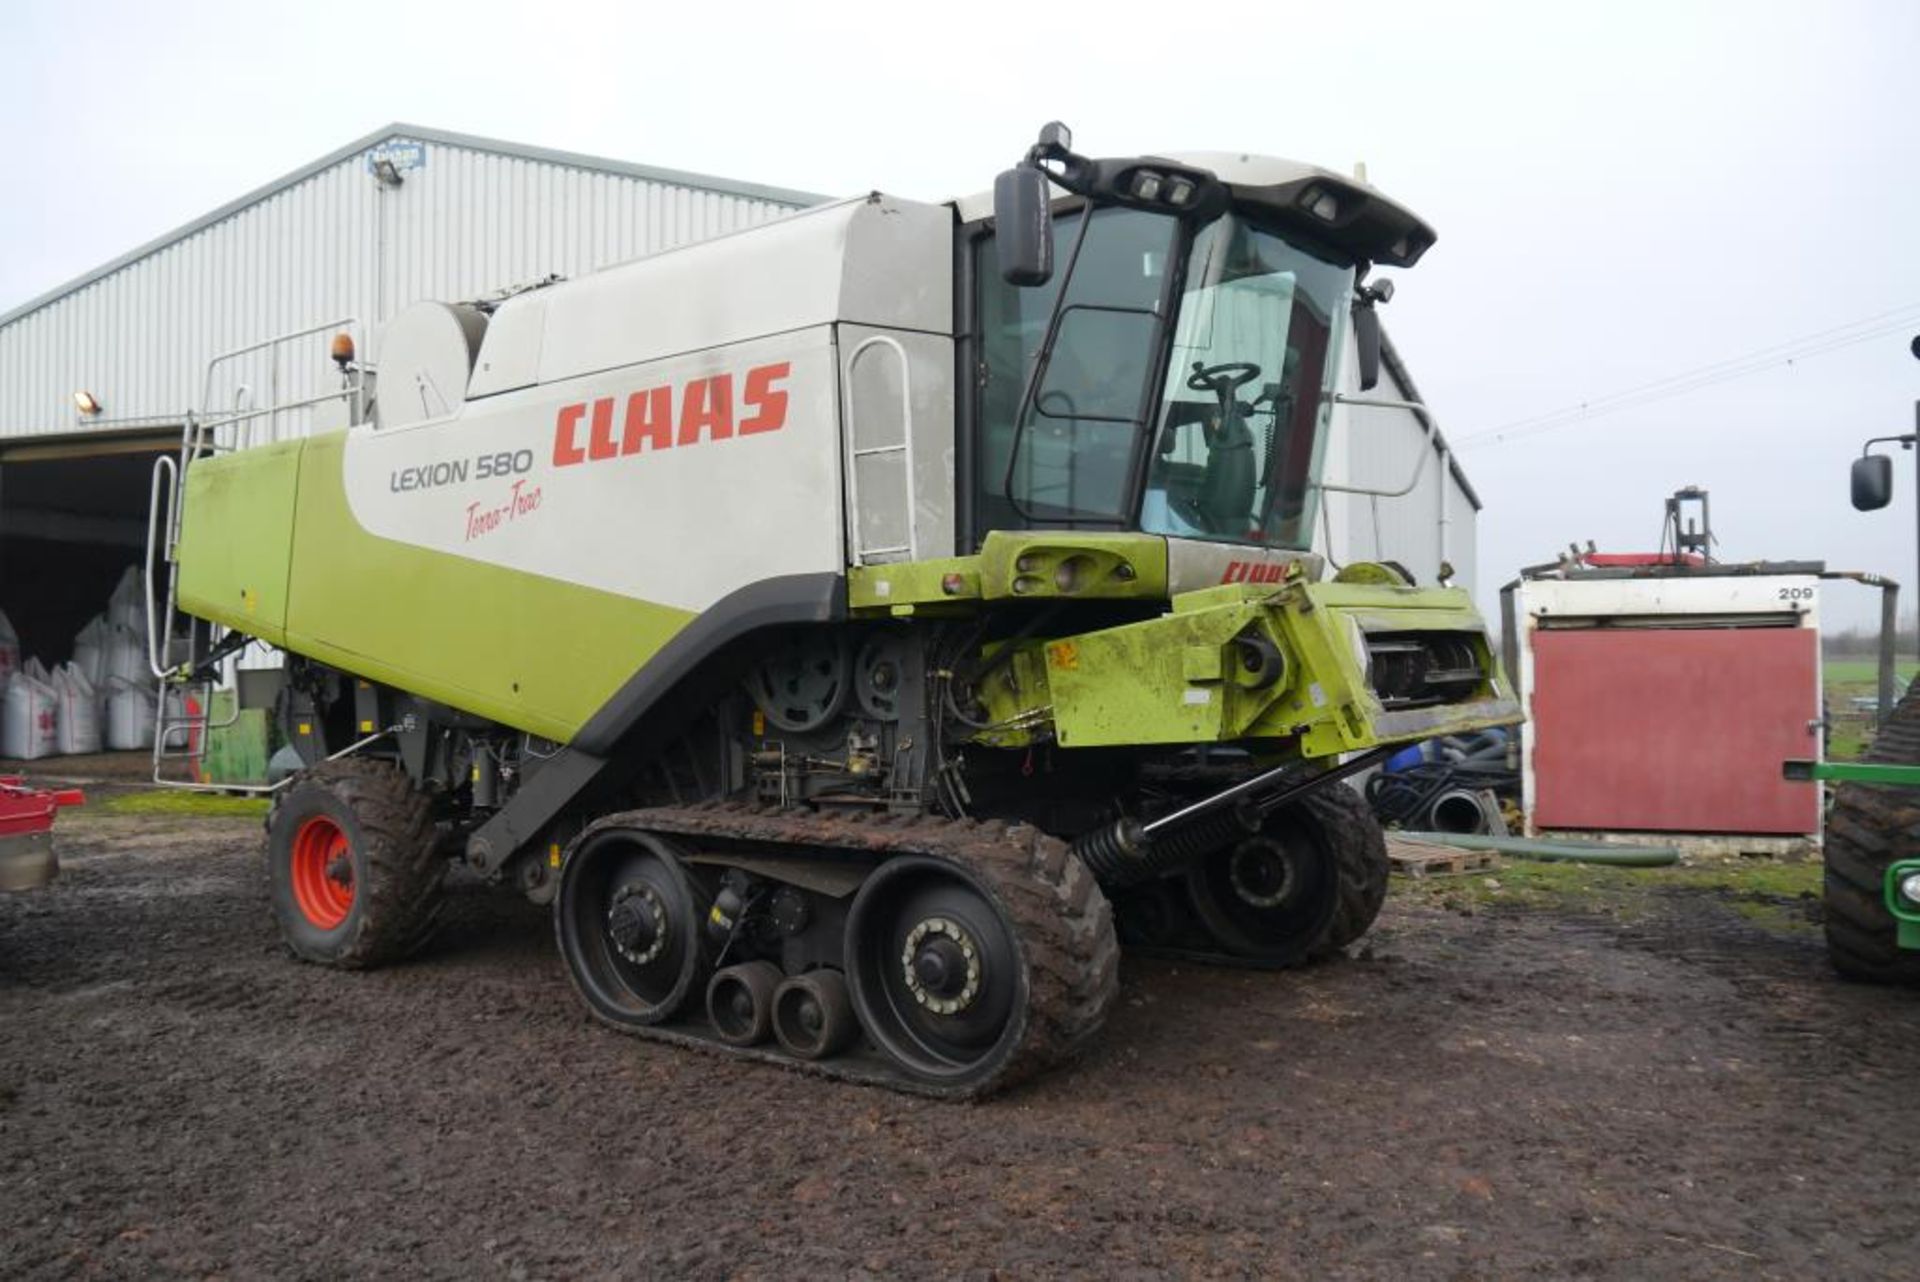 2004 CLAAS Lexion 580 Terra-Trac COMBINE HARVESTER Fitted with Claas Vario V900 Auto-Contour